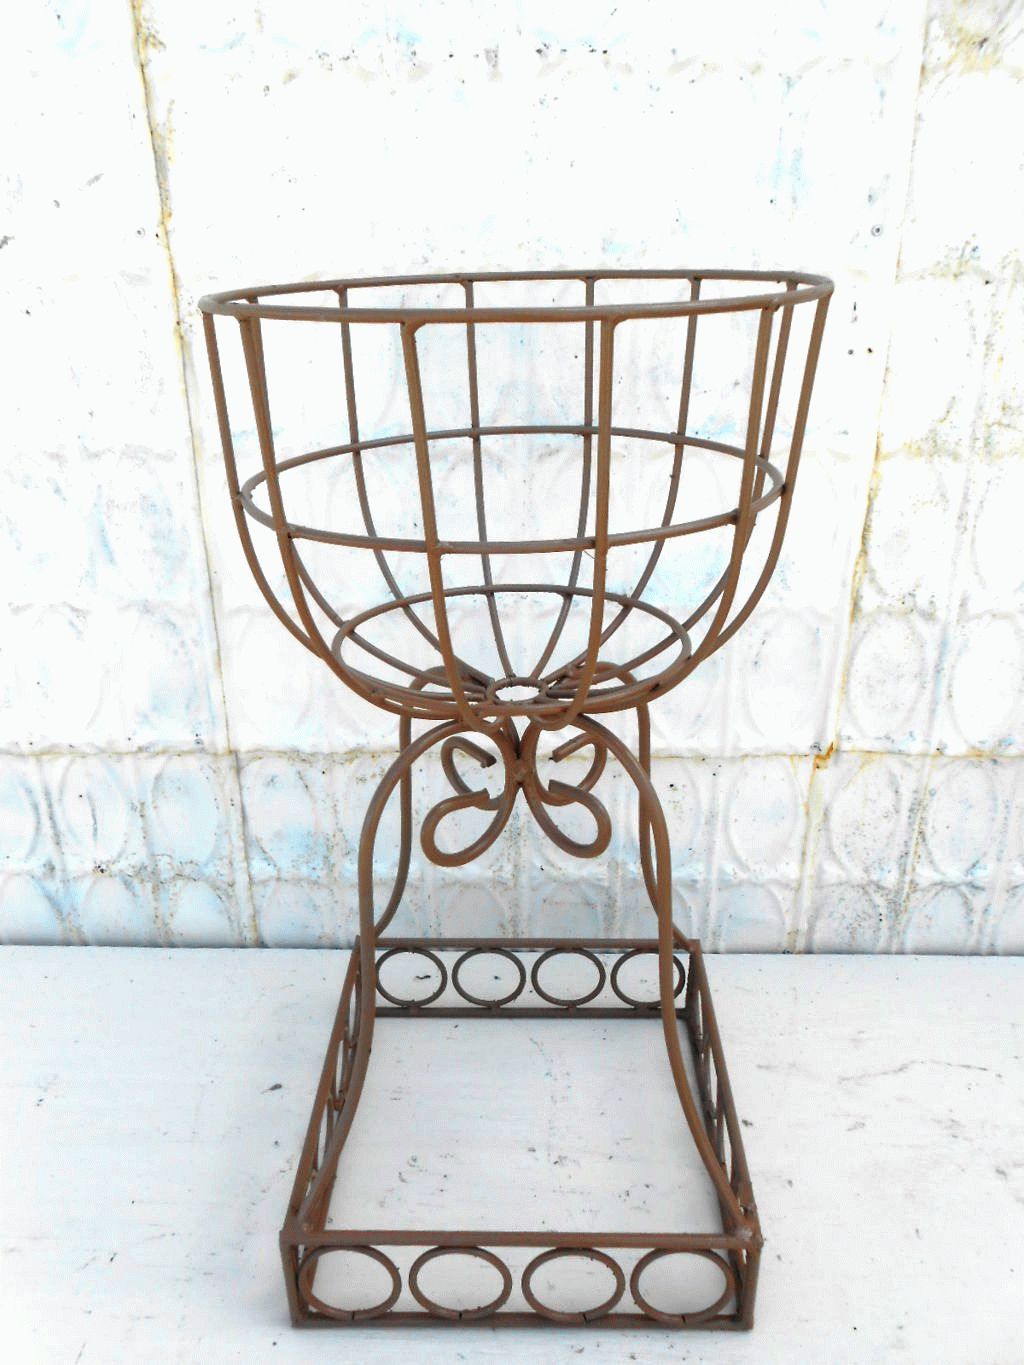 Plant Stands With Flower Bowl Regarding 2019 29" Madeline Wrought Iron Bowl Plant Stand Decorative Container (View 7 of 15)